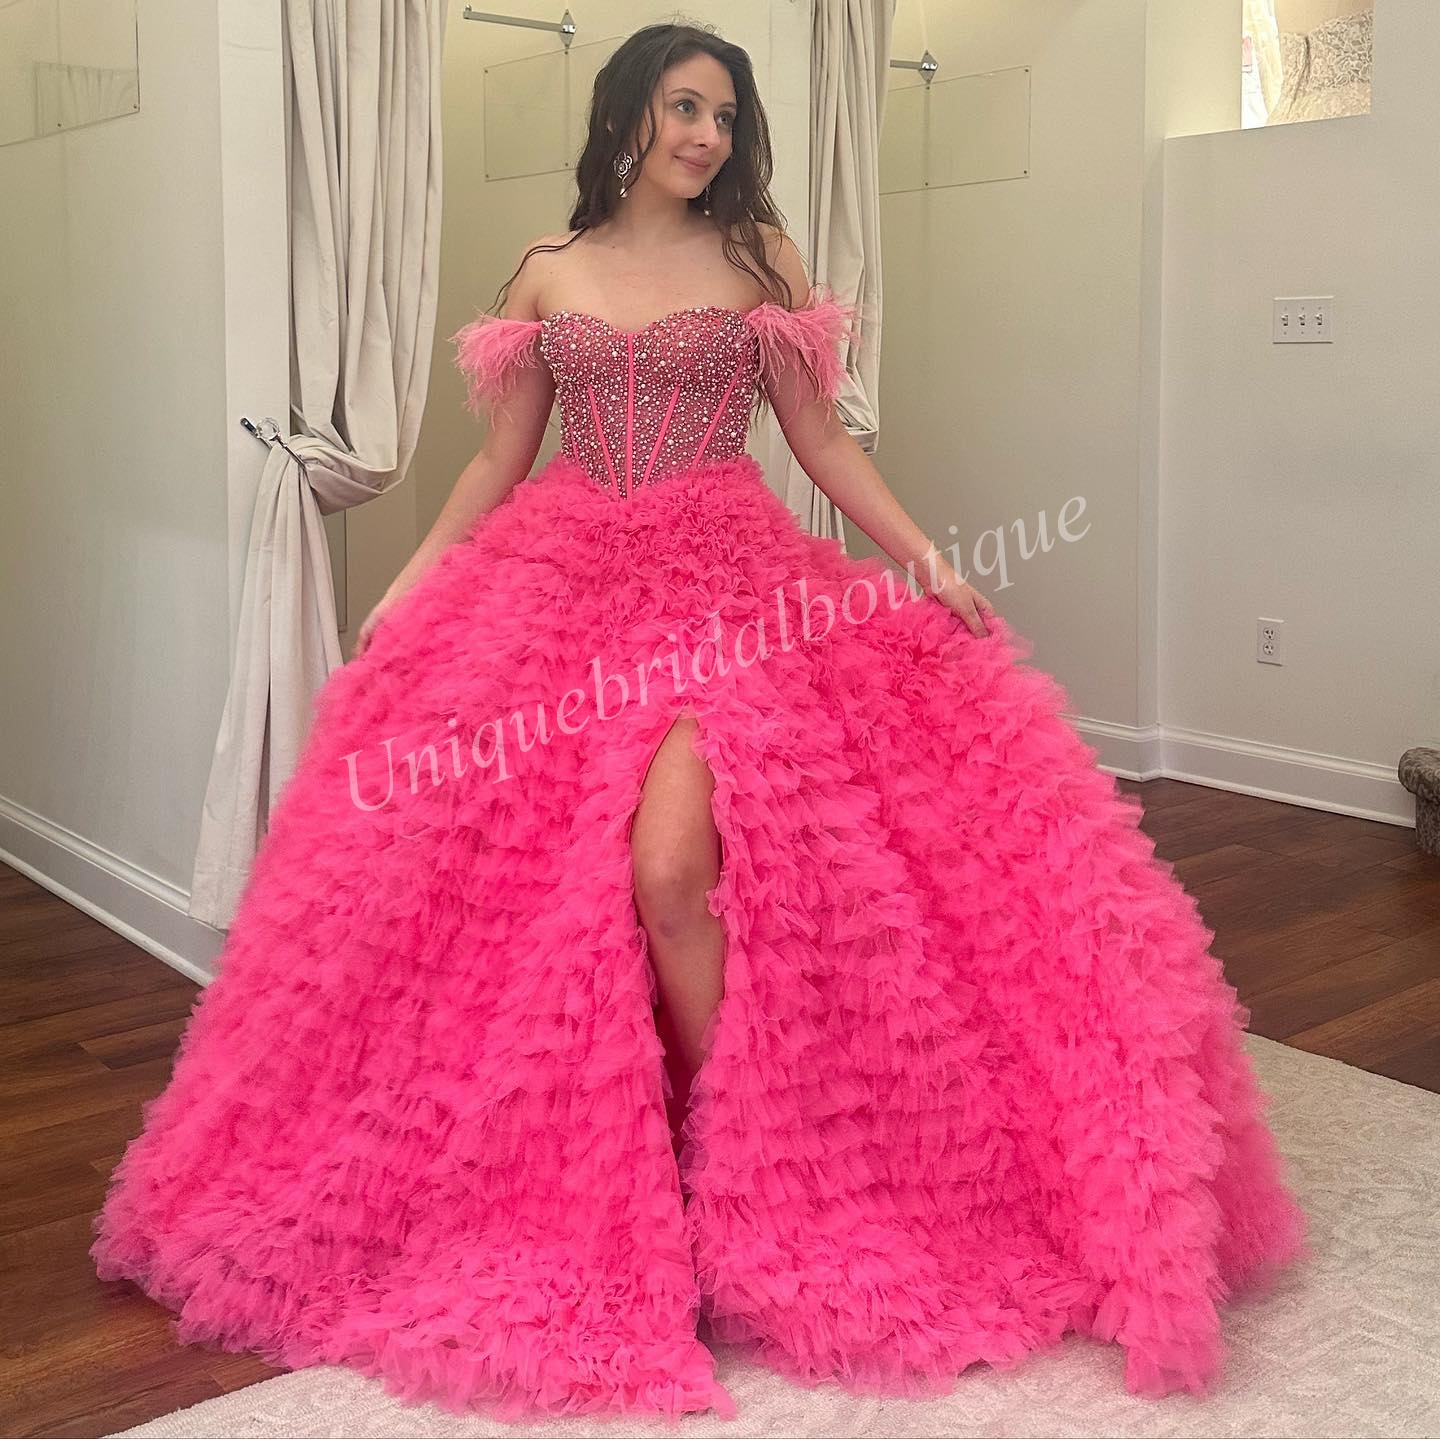 Ruffled Skirt Ballgown Prom Dress 2k23 Beaded Corset Top Pageant Gown Off Shoulder Feathered Sleeves High Slit Formal Event Party Runway Quince Lilac Aqua Candy Pink